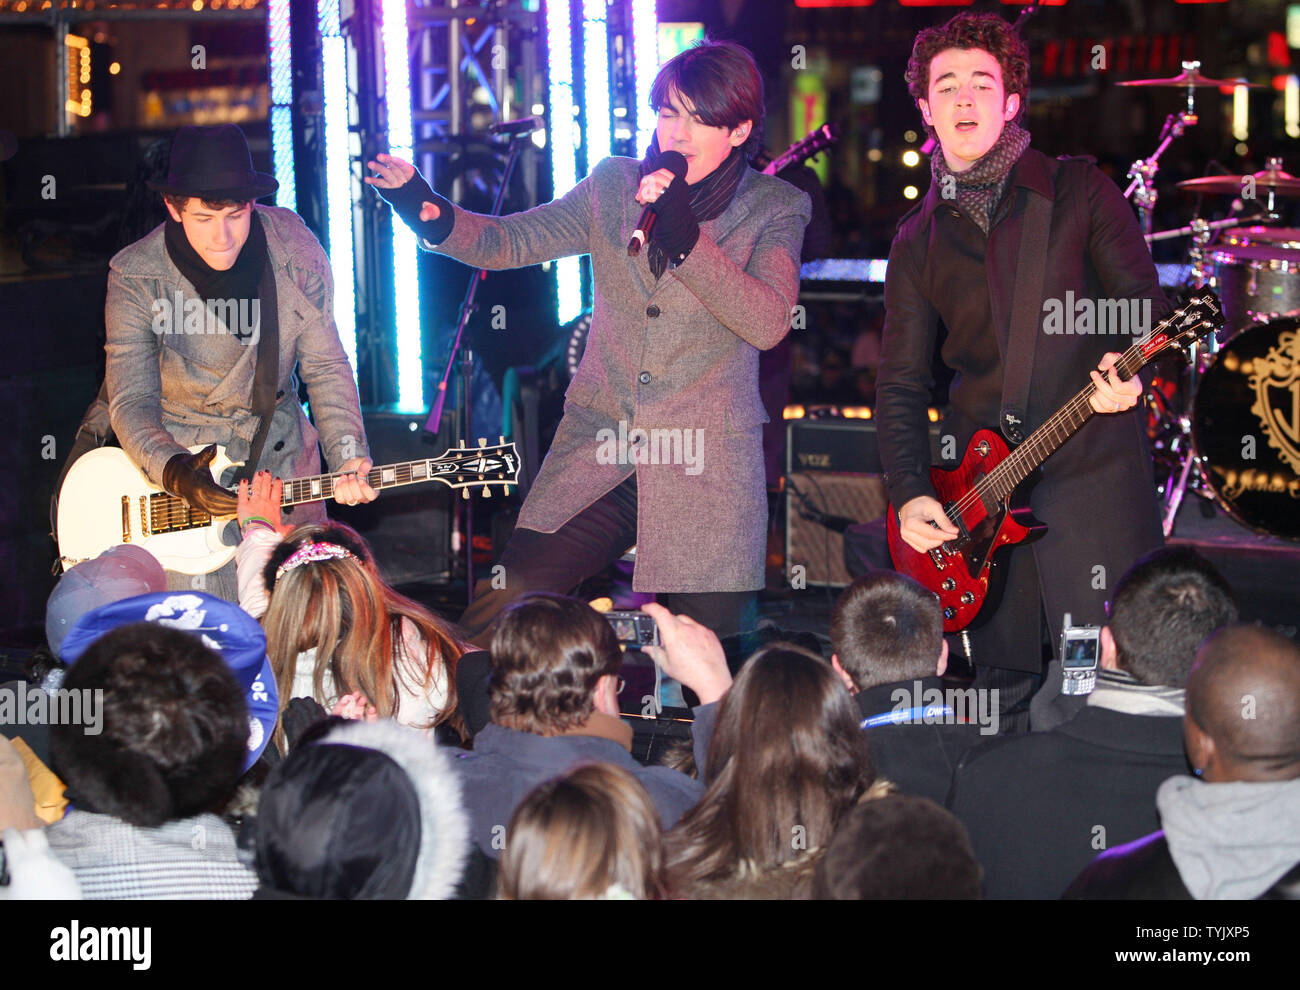 The Jonas Brothers perform in Times Square during the New Year's Eve celebration on December 31, 2008 in New York City. (UPI Photo/Monika Graff) Stock Photo